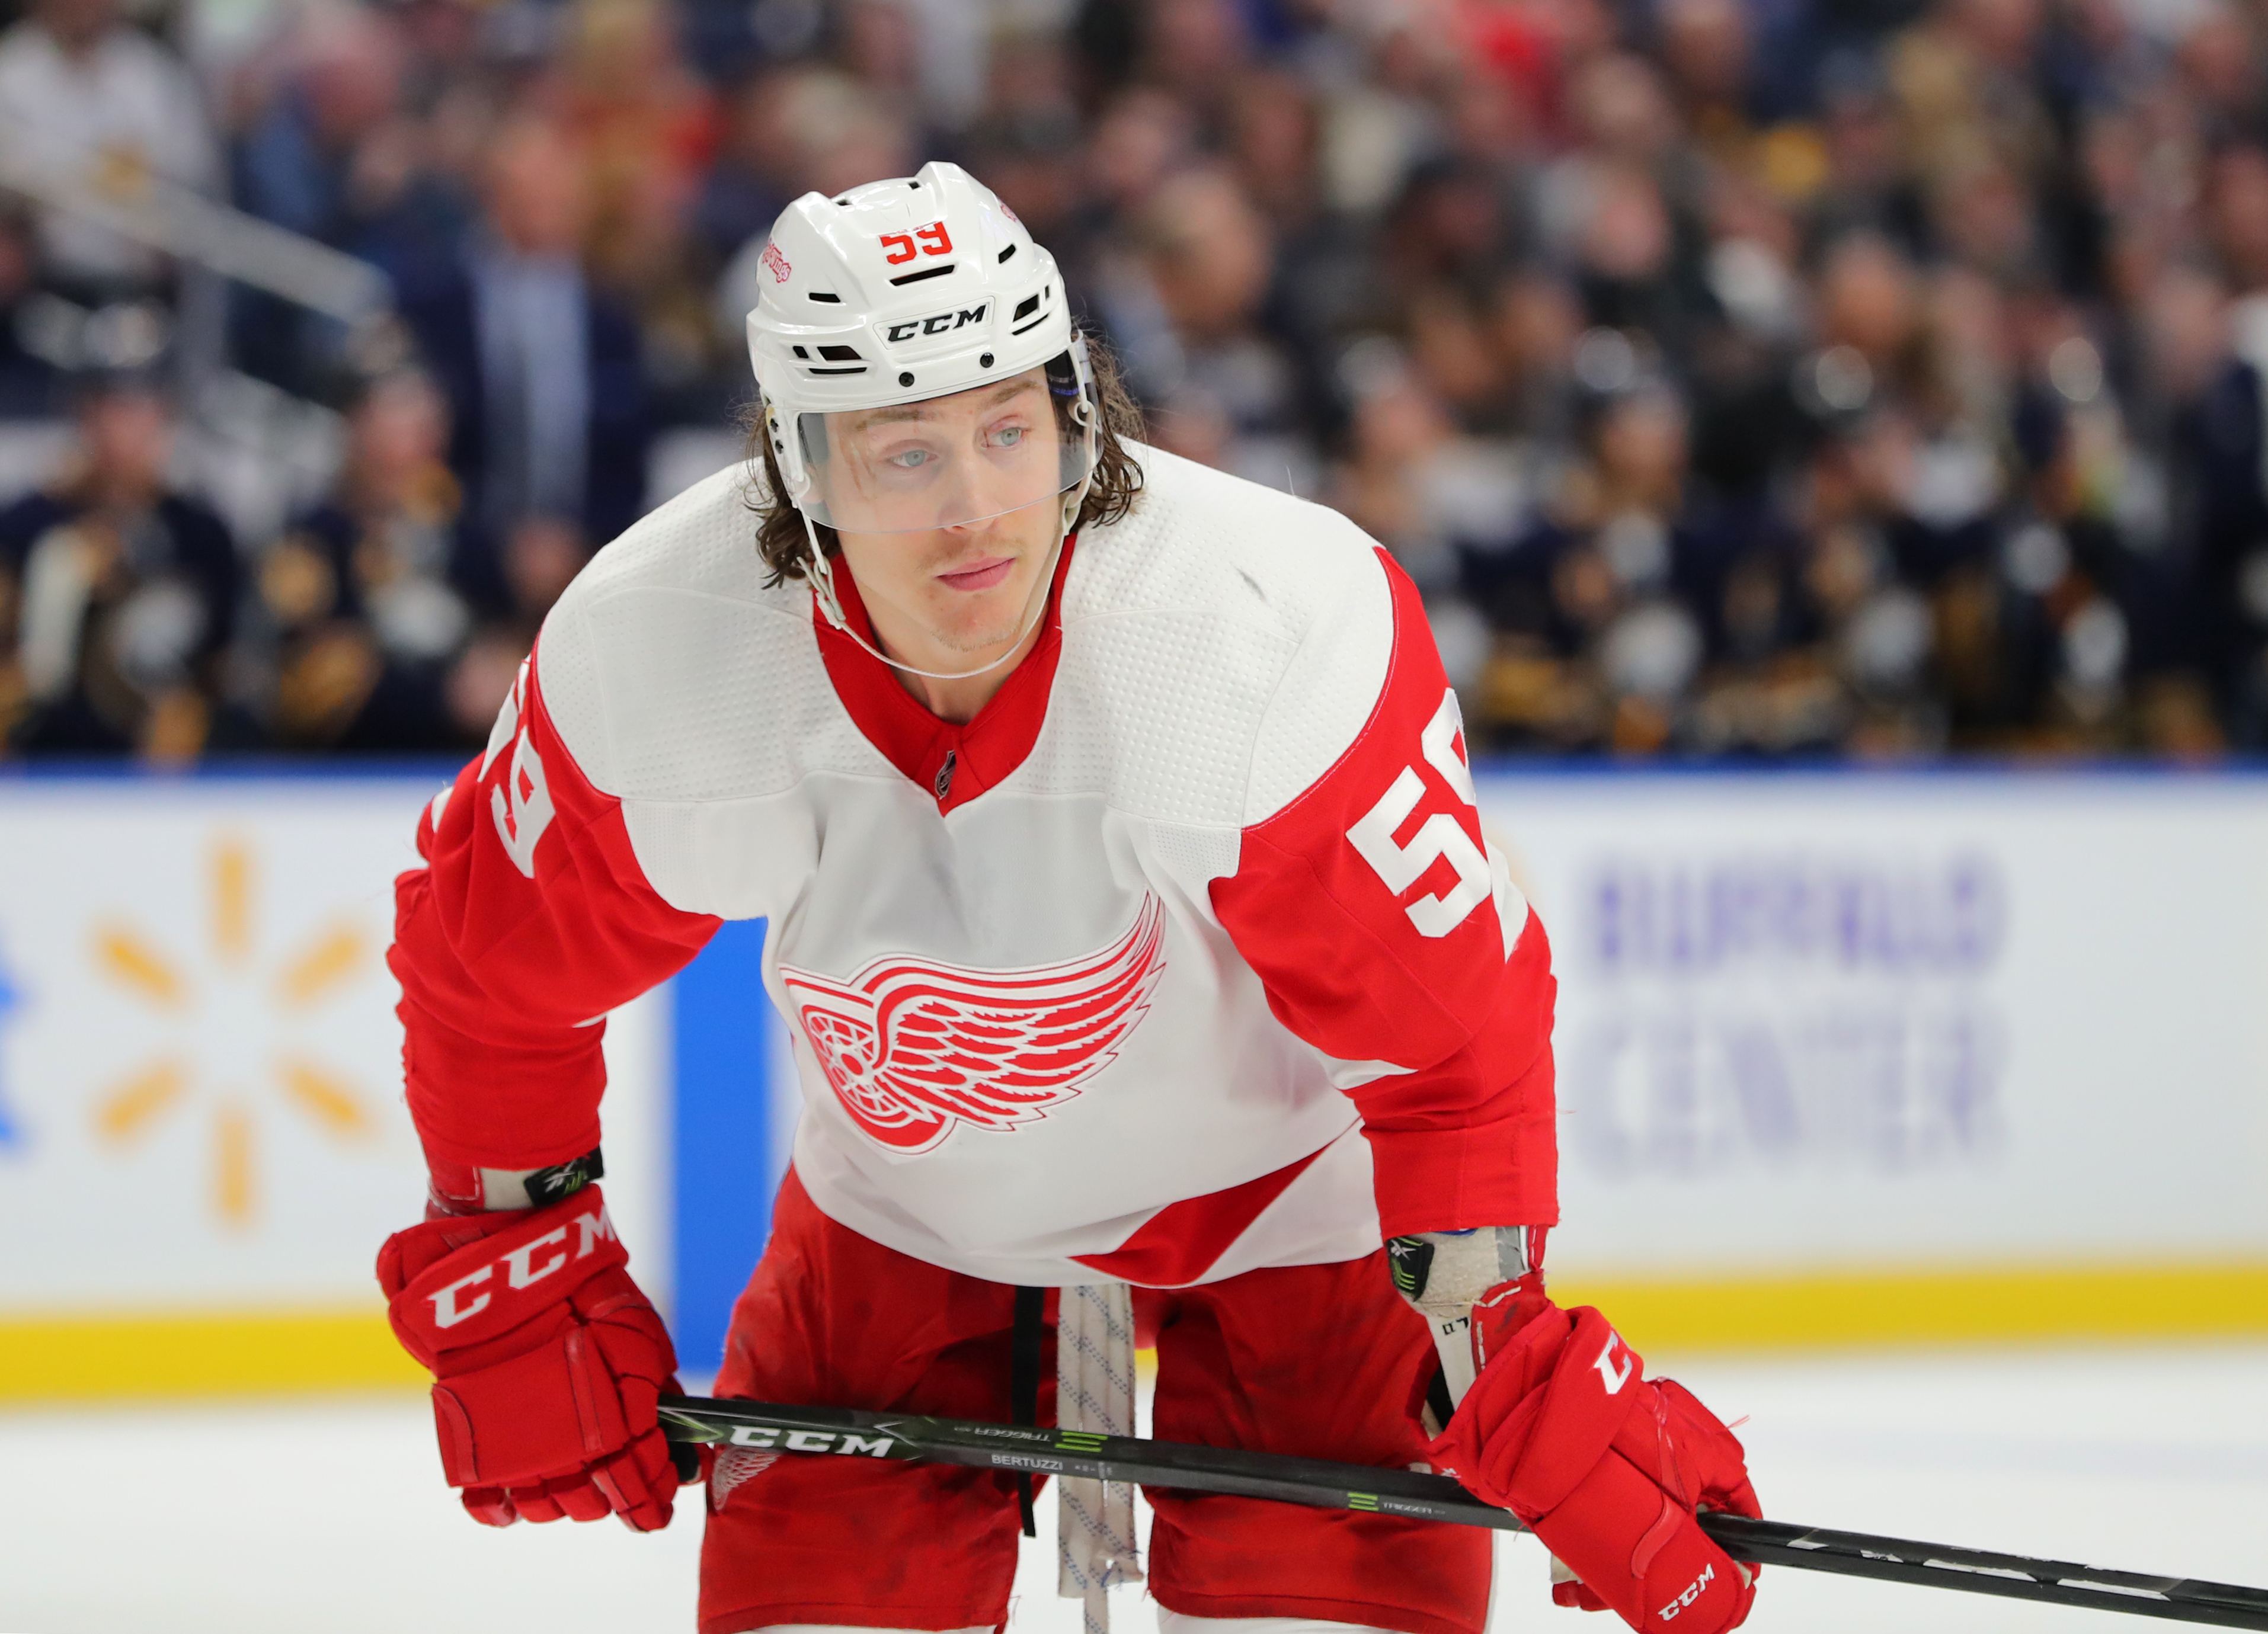 Red Wings 2022 offseason outlook: Free agents, contracts, draft